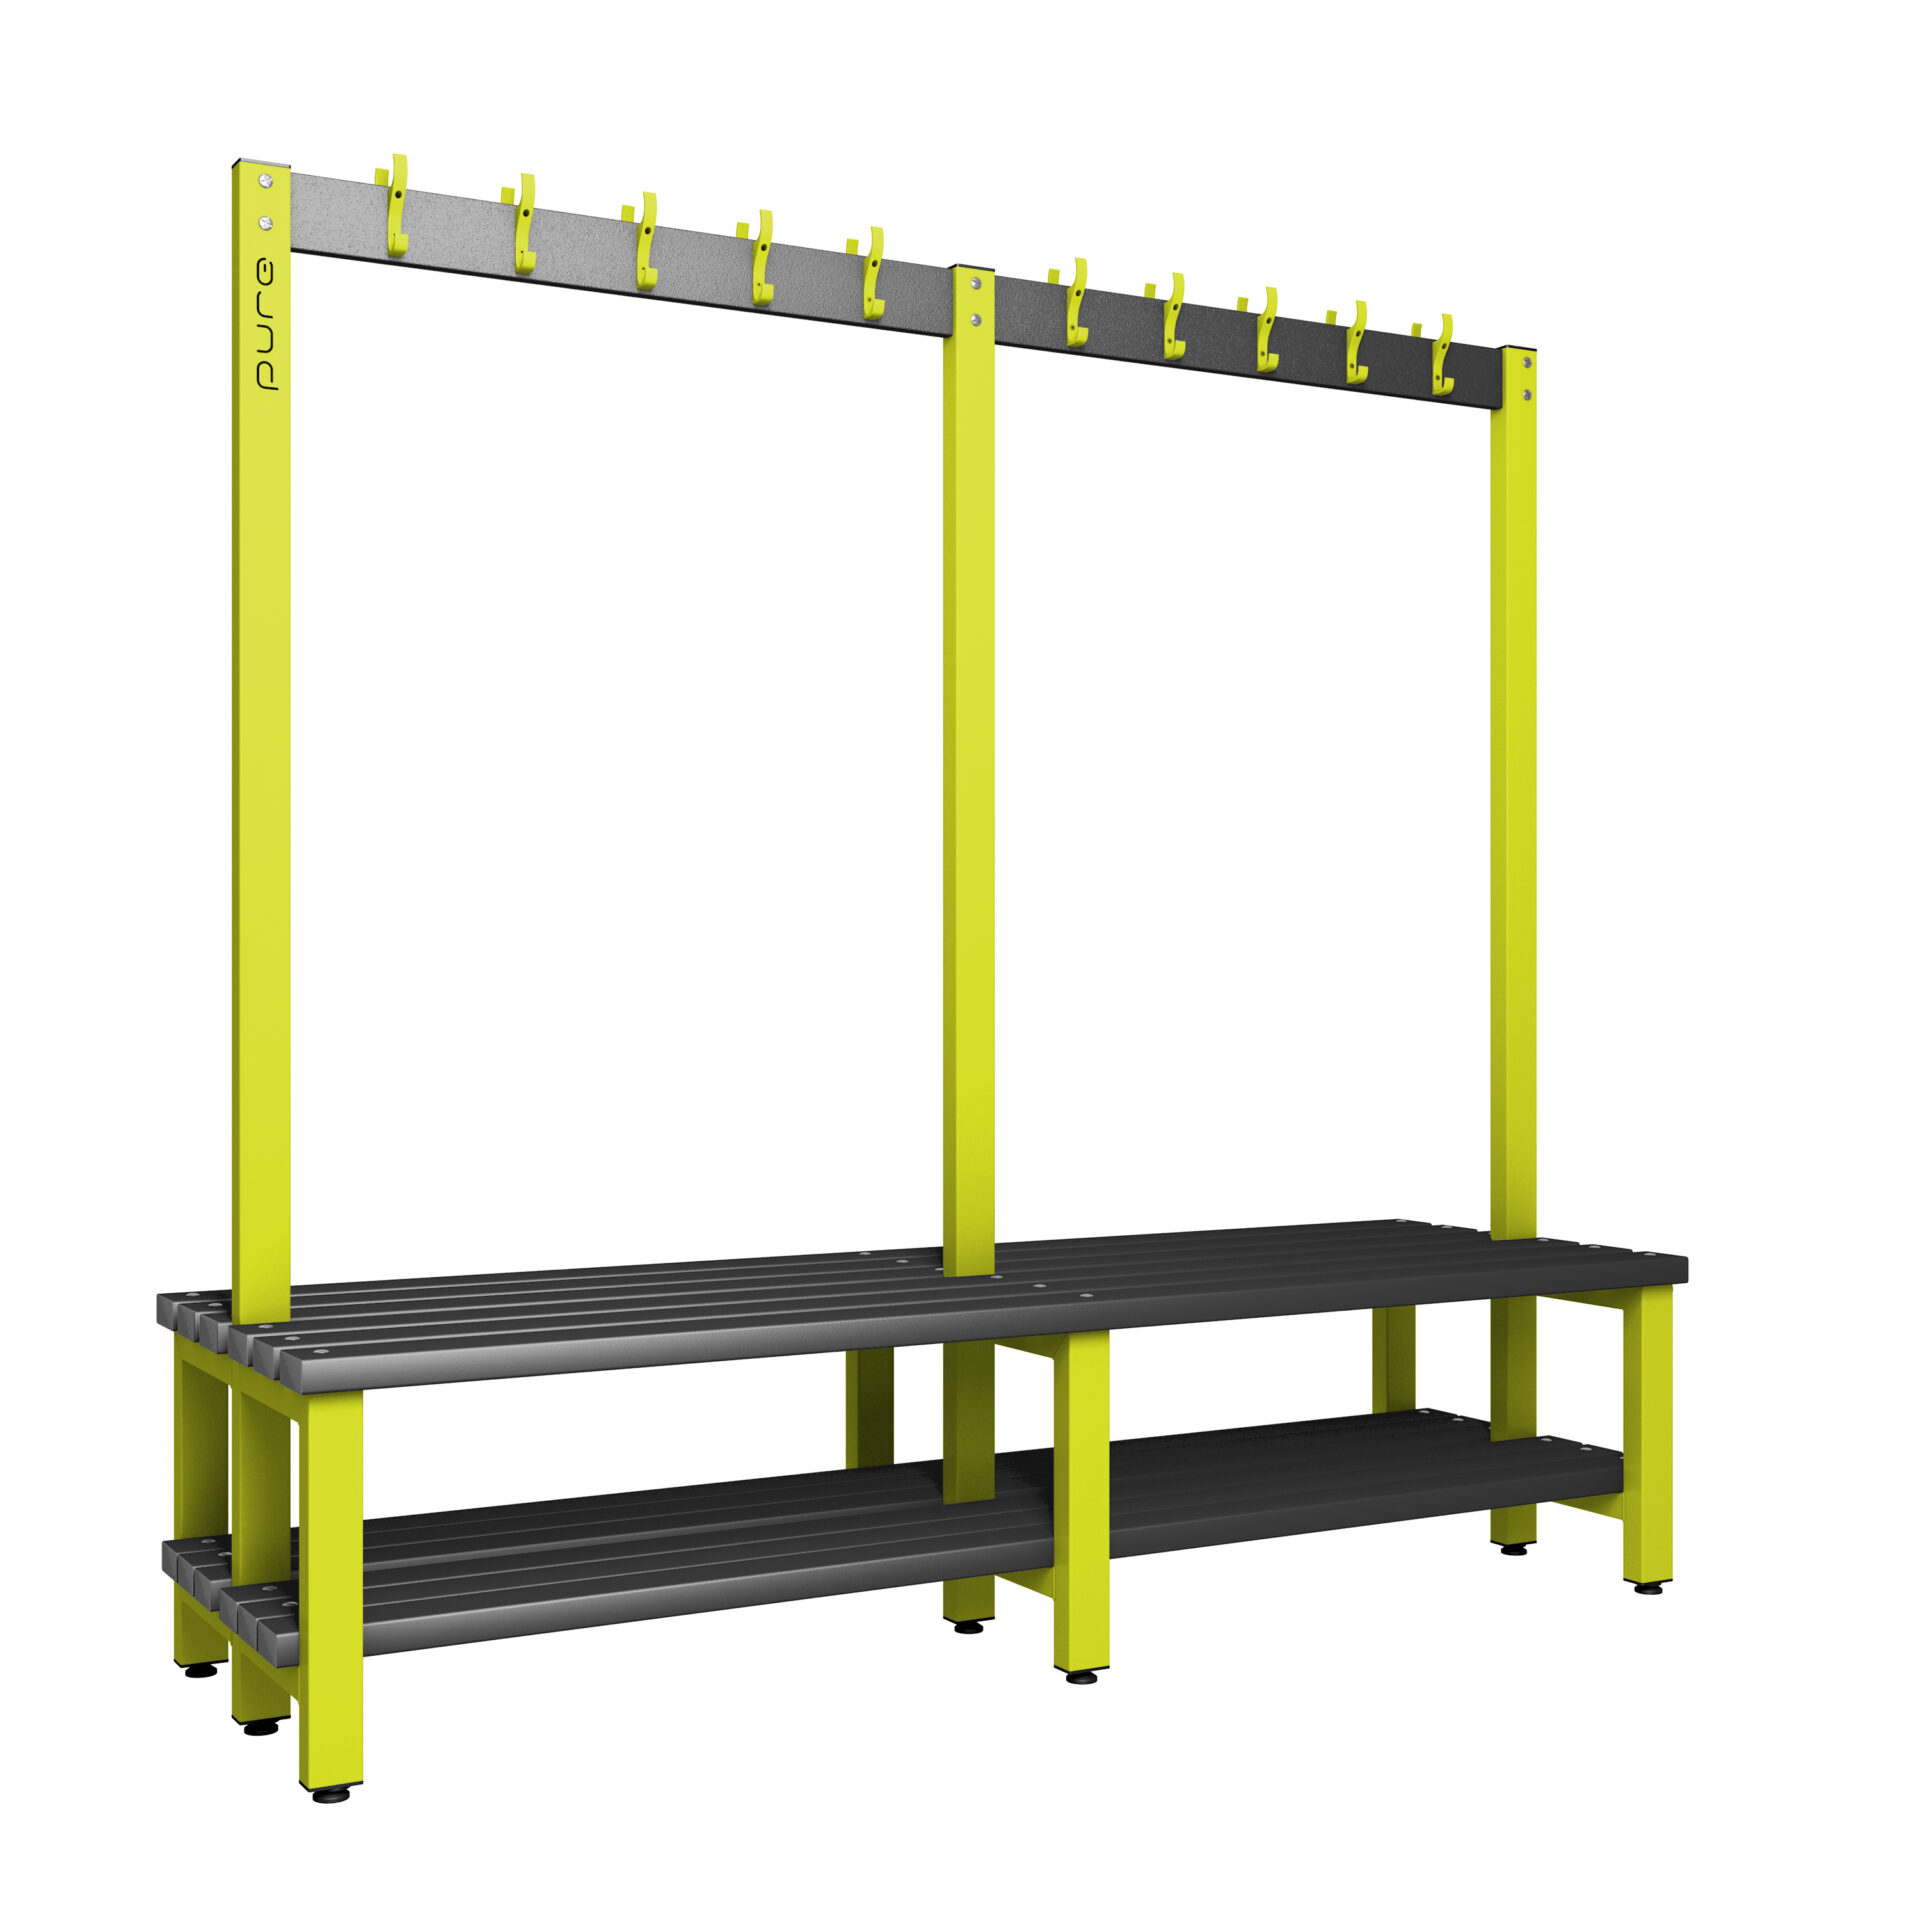 Pure Carbon Zero Double Sided 2000mm 20 Hook Bench With Shoe Shelf